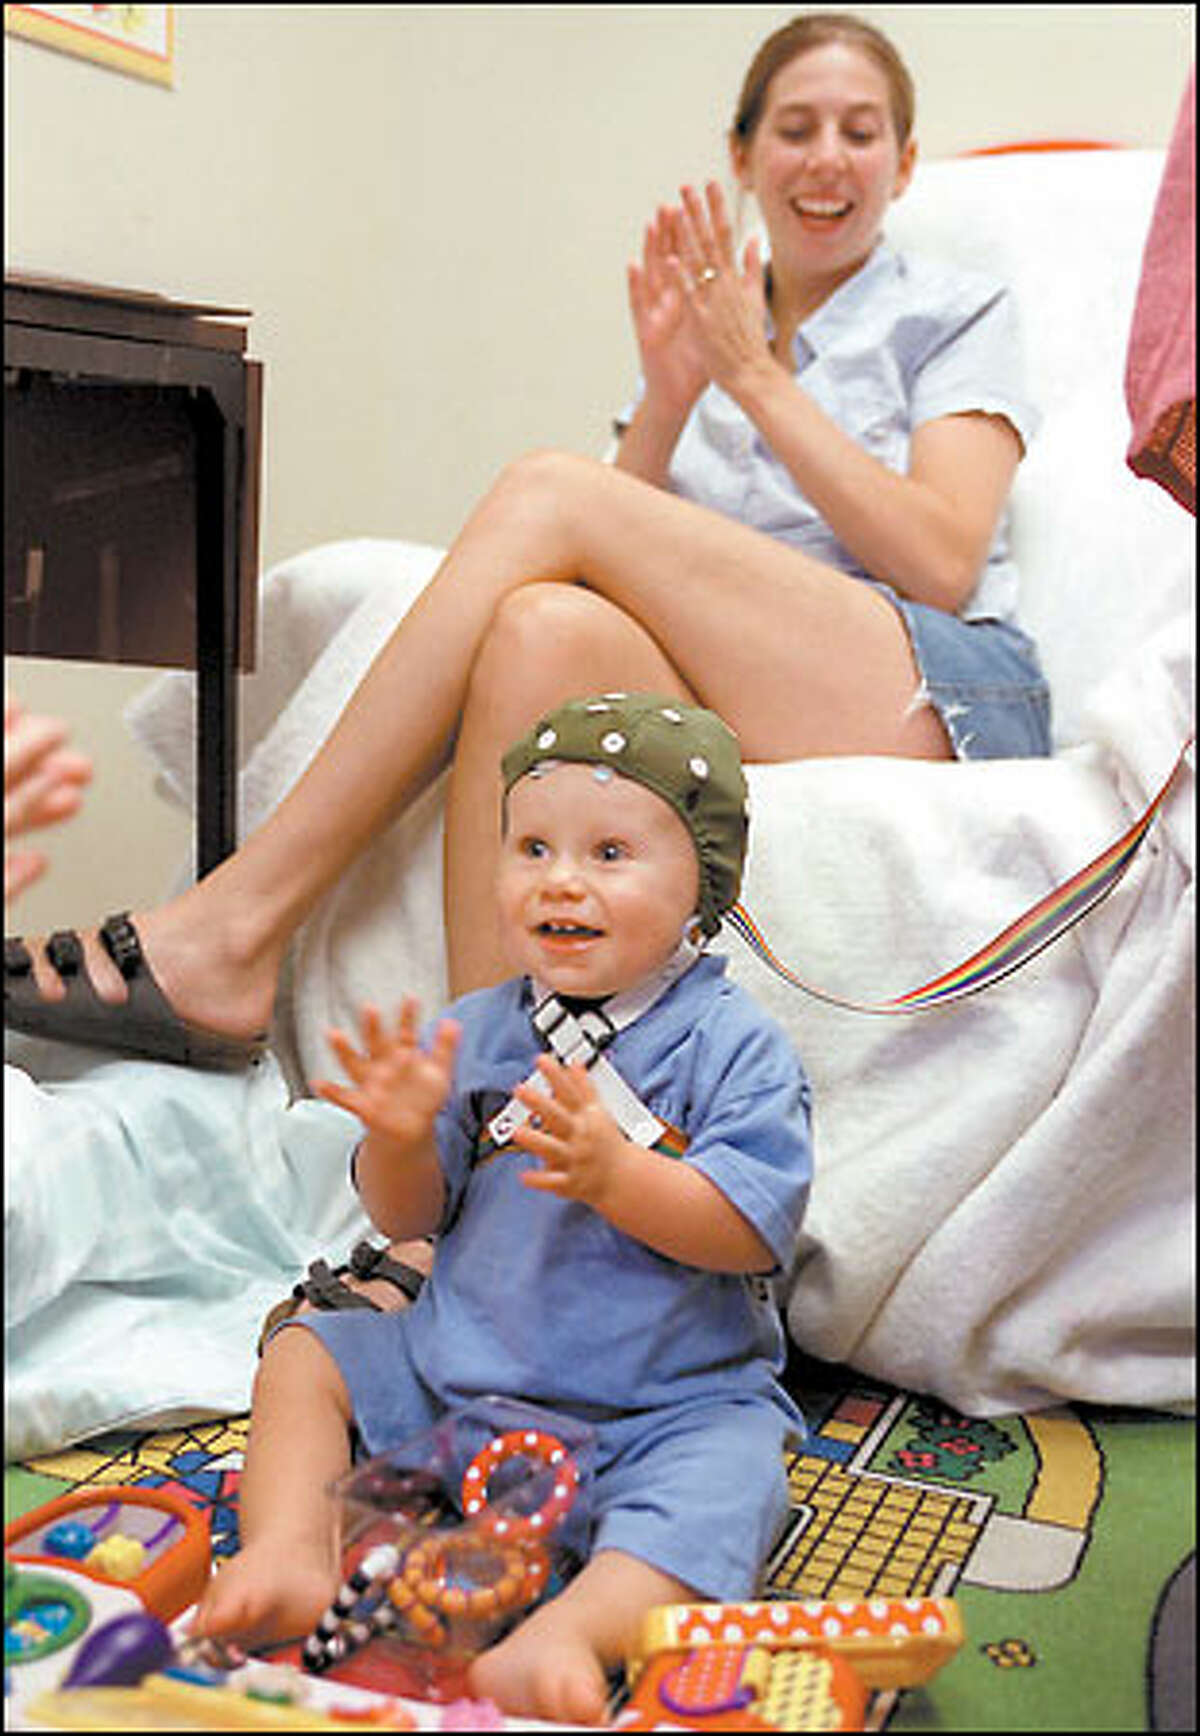 Samuel Dodd, 11 months, gets ready to participate in an event-related experimental session at the University of Washington to study speech perception. Behind him is his mom, Janine Dodd of Auburn.